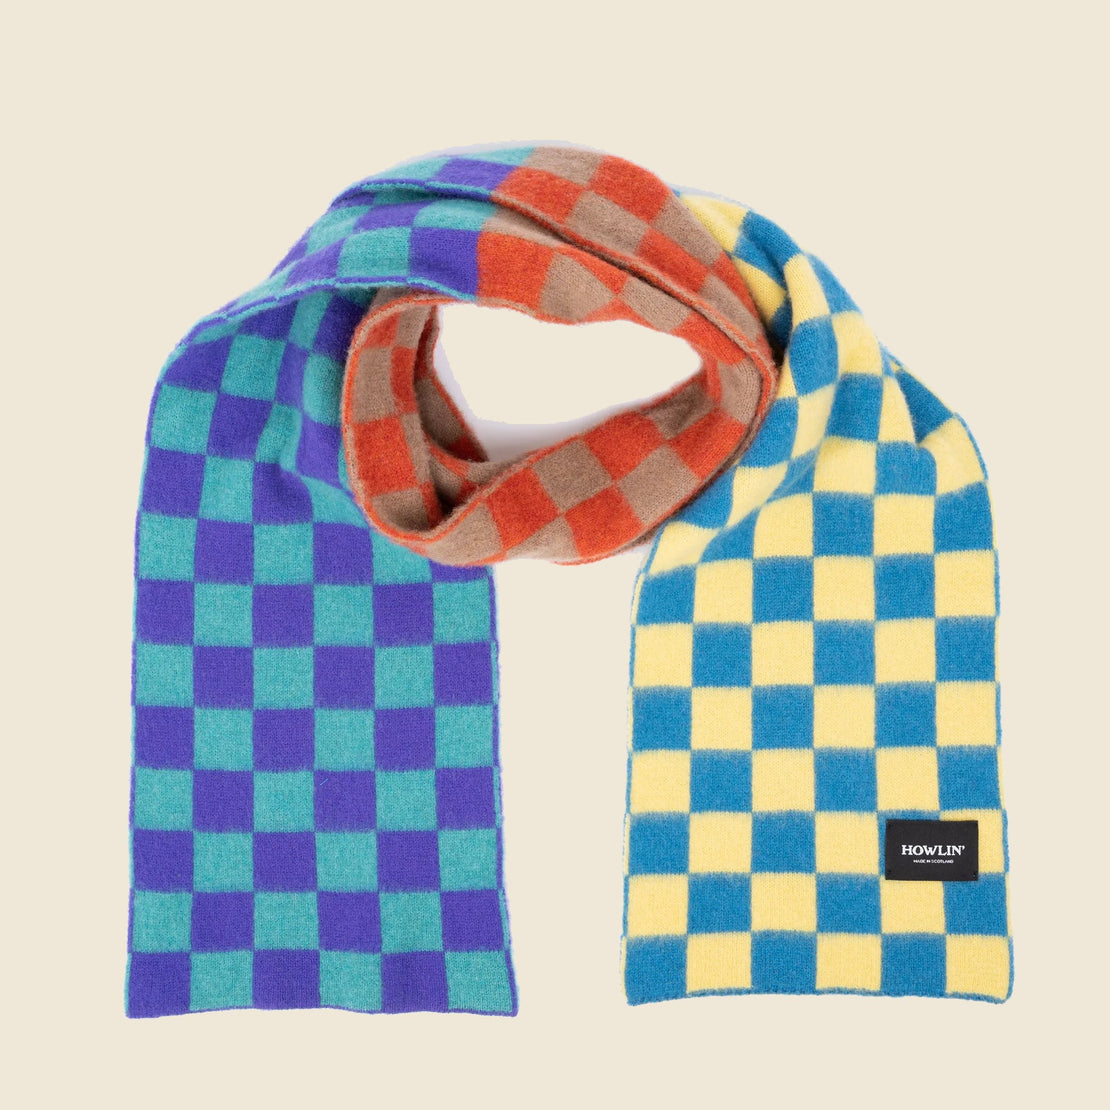 Cosmic Checkerboard Scarf - Mixed Up - Howlin - STAG Provisions - W - Accessories - Scarf